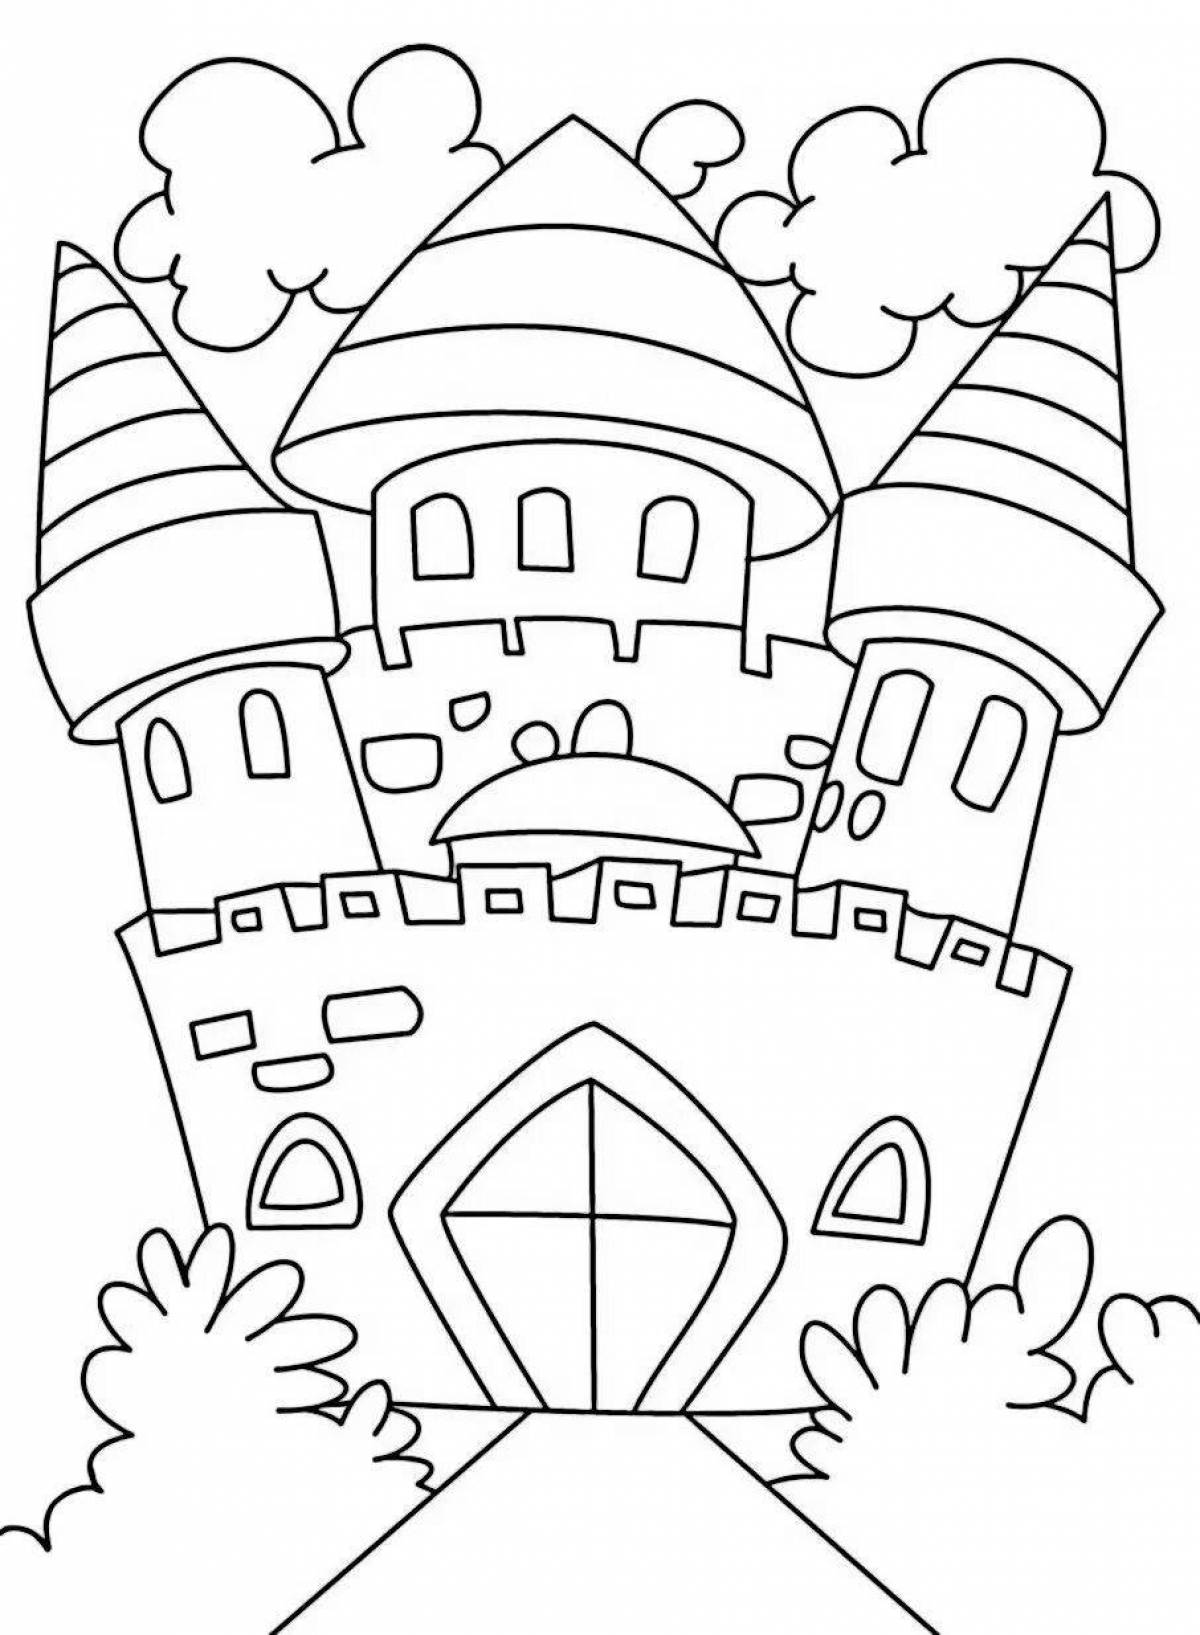 Great castle coloring pages for kids